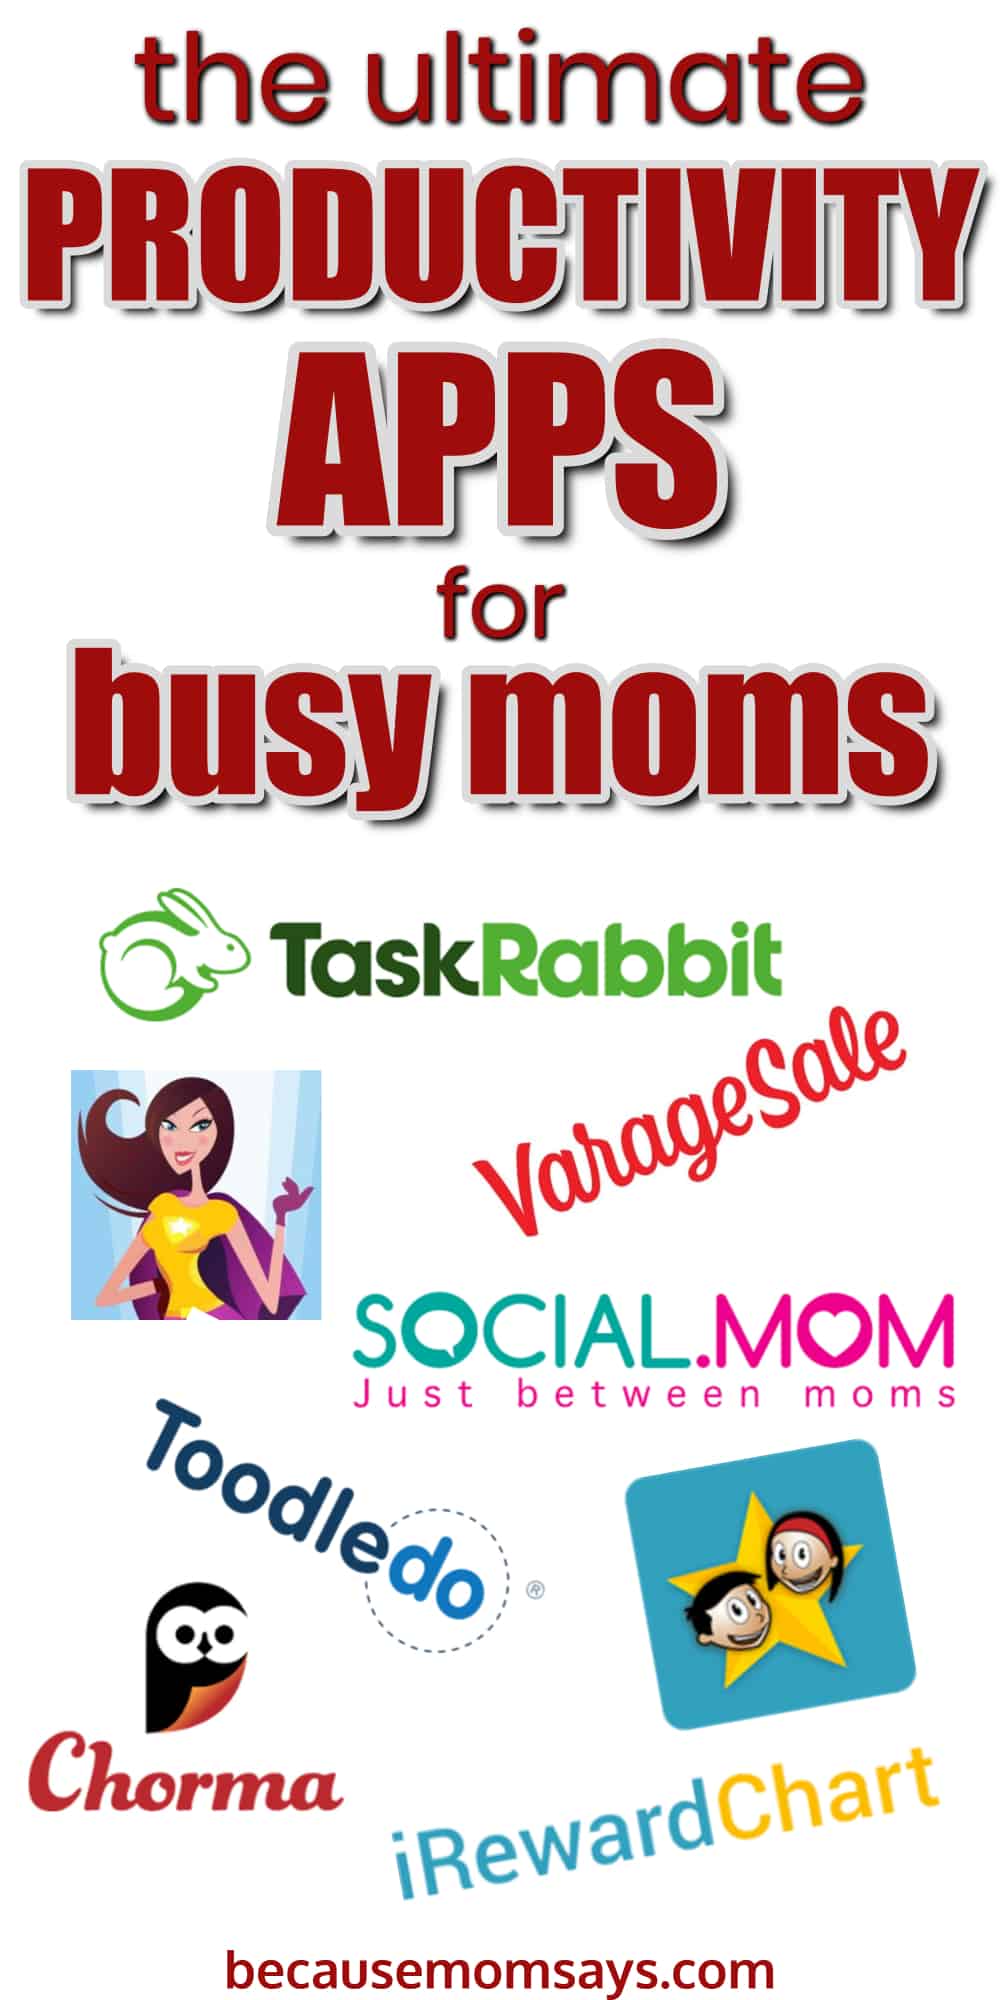 Looking for apps to help your busy schedule? You're going to love this list of best apps for moms! So many uses to help organize your life!